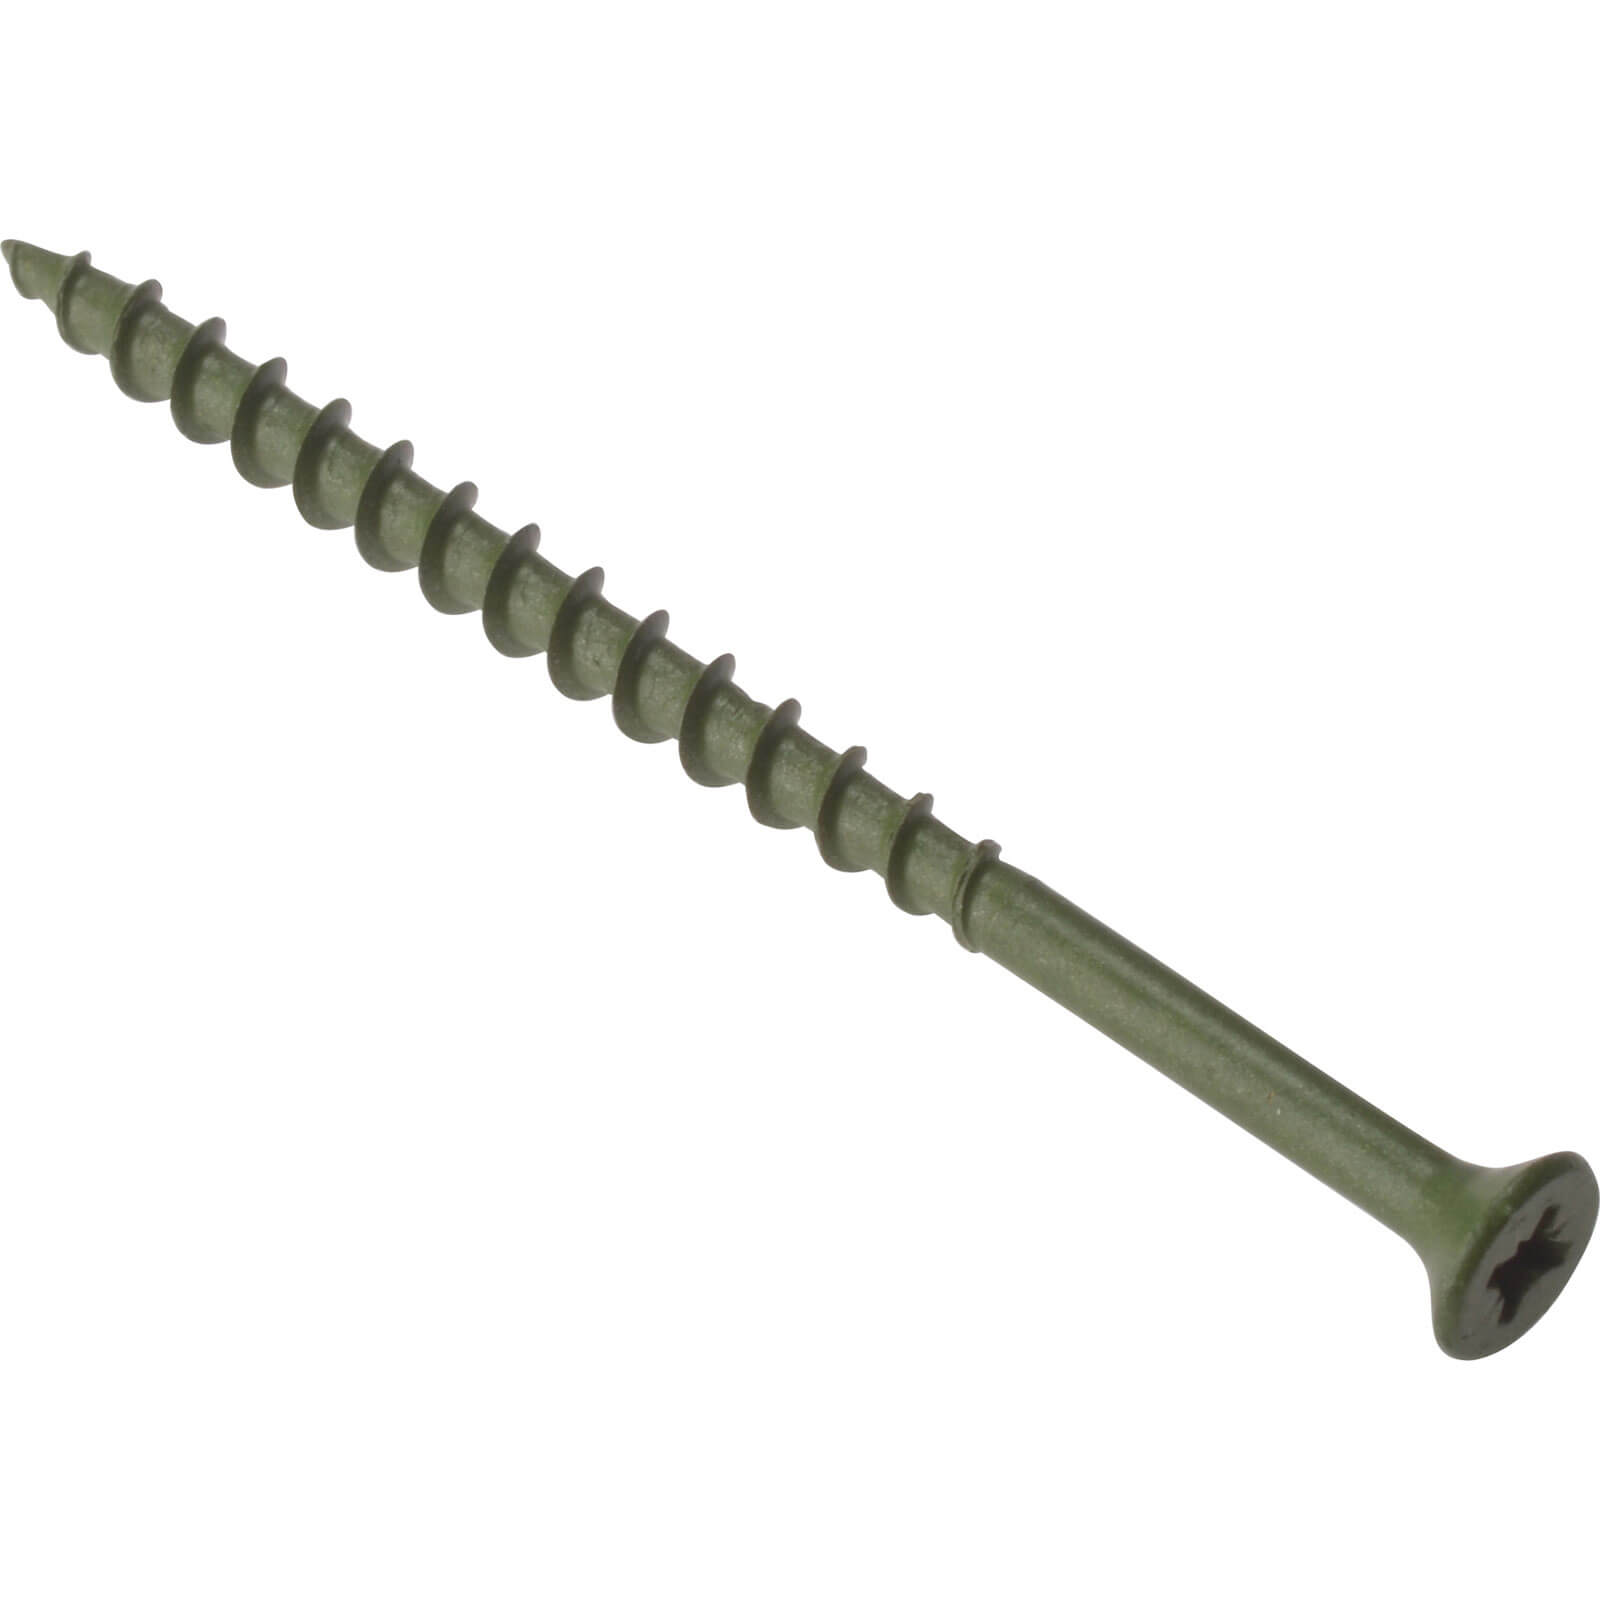 Image of ForgeFix Decking Screw Pozi ST Green Anti-Corrosion Treated 4.5mm 55mm Pack of 1000